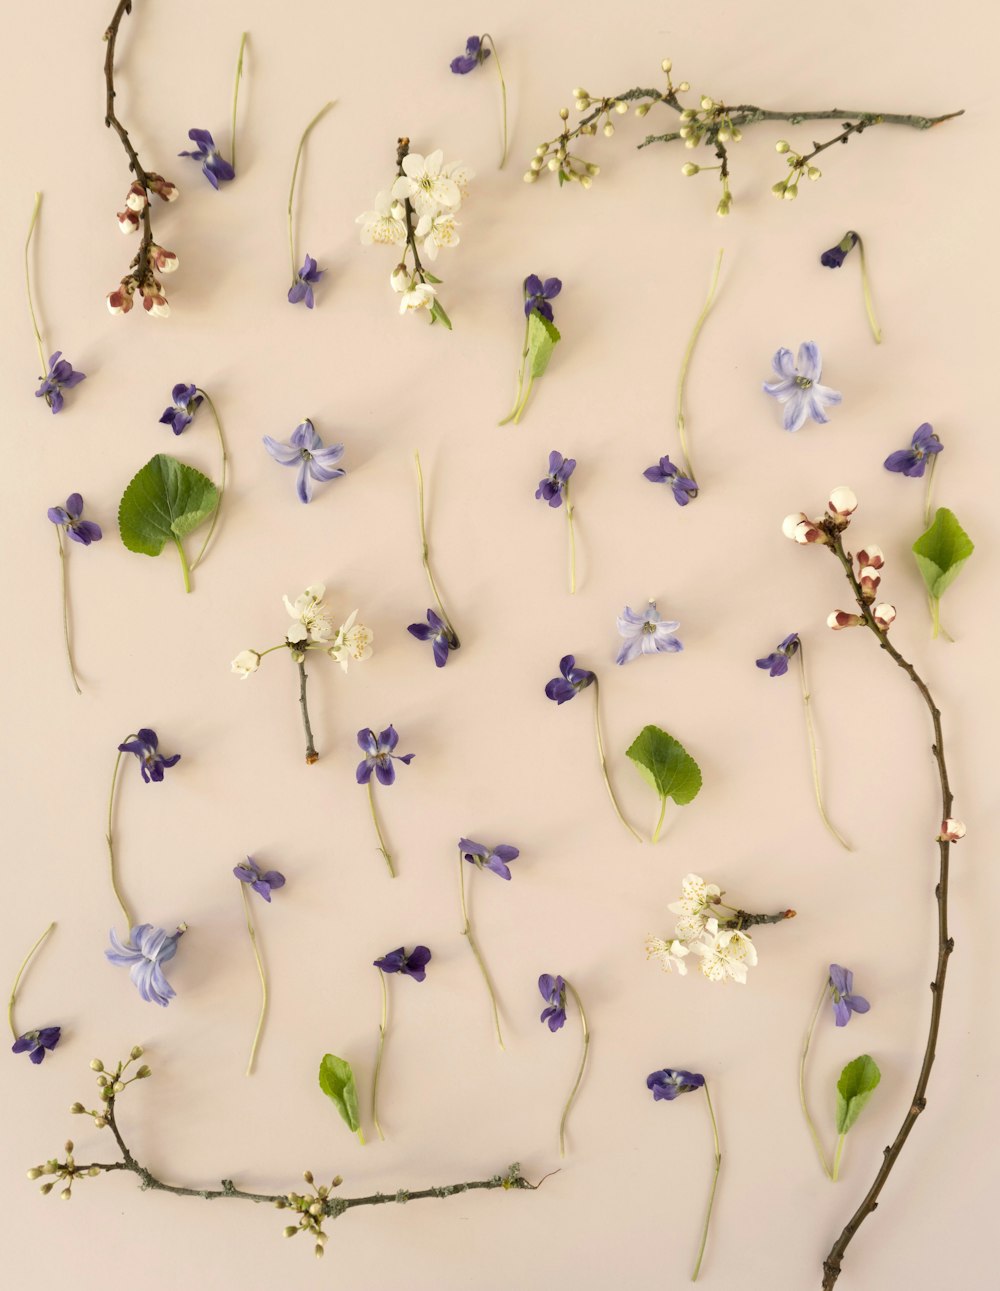 a group of blue and white flowers on a white surface